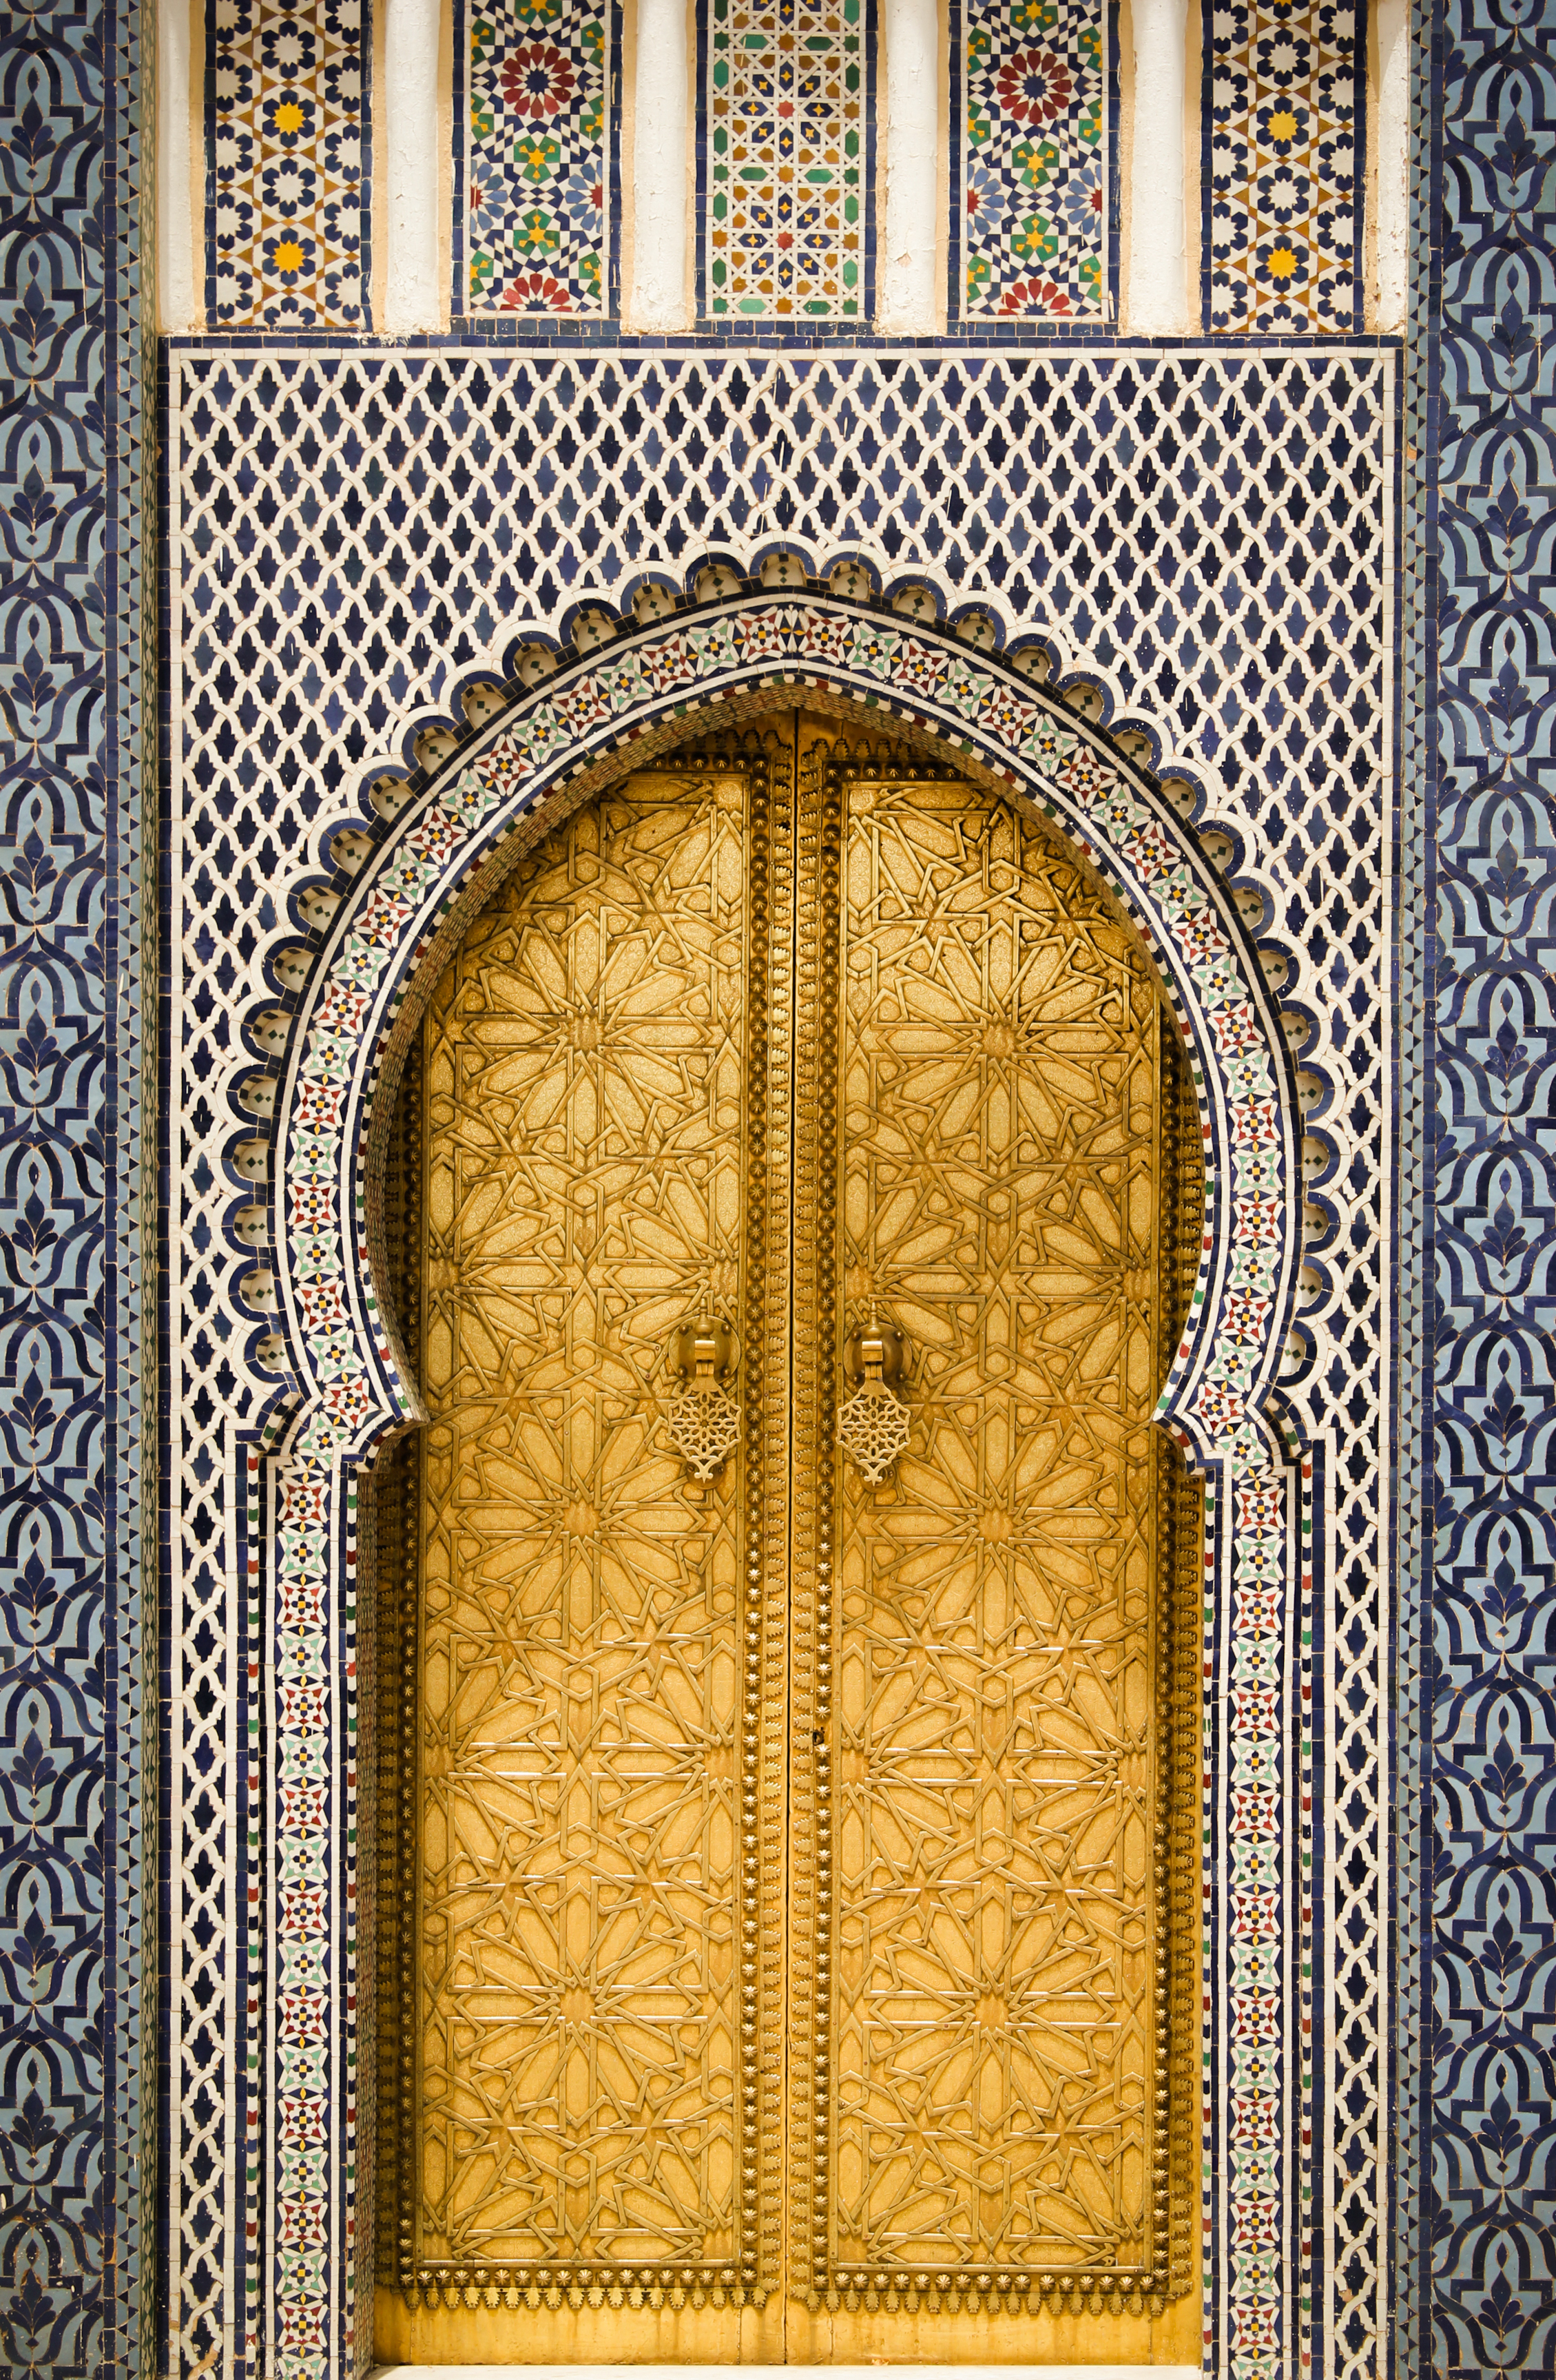 Gate to the Royal Palace in Fes